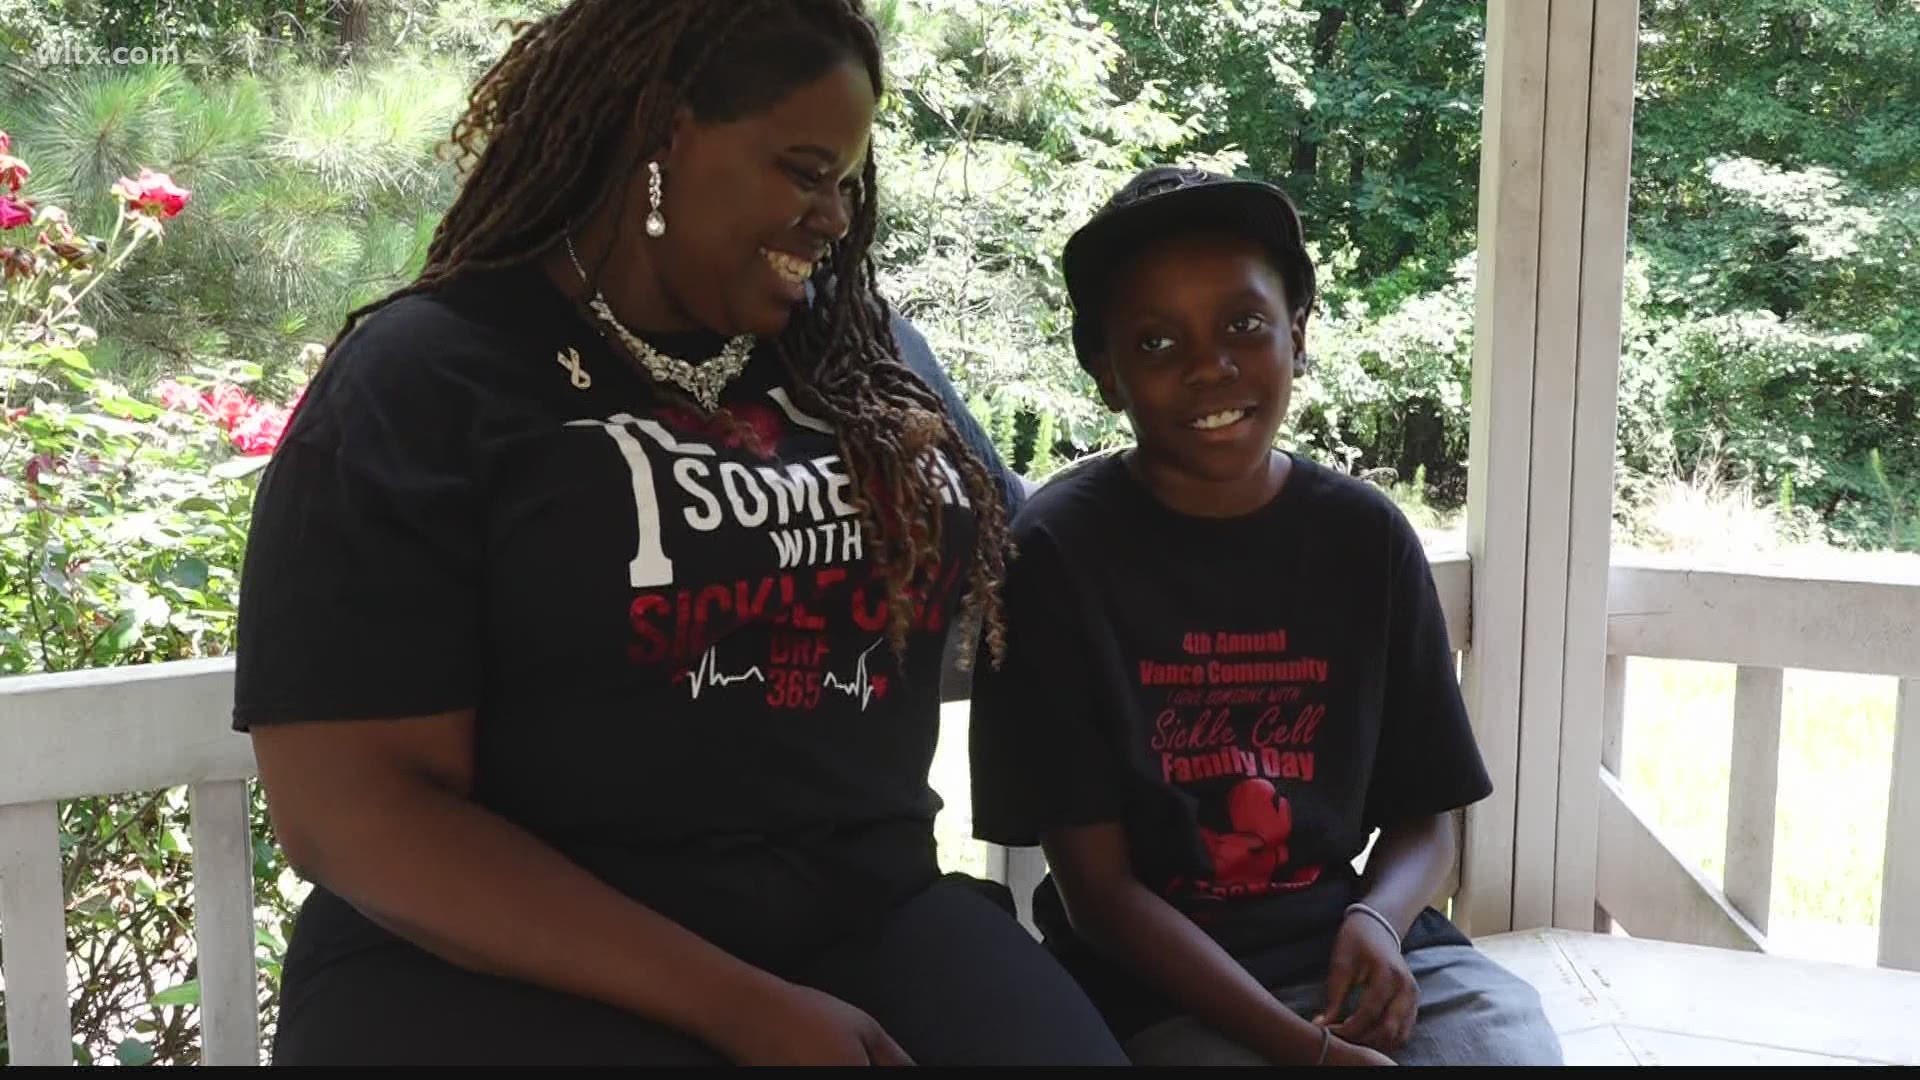 South Carolina is ranked in the top 15 states across the county with the most people living with sickle cell disease.